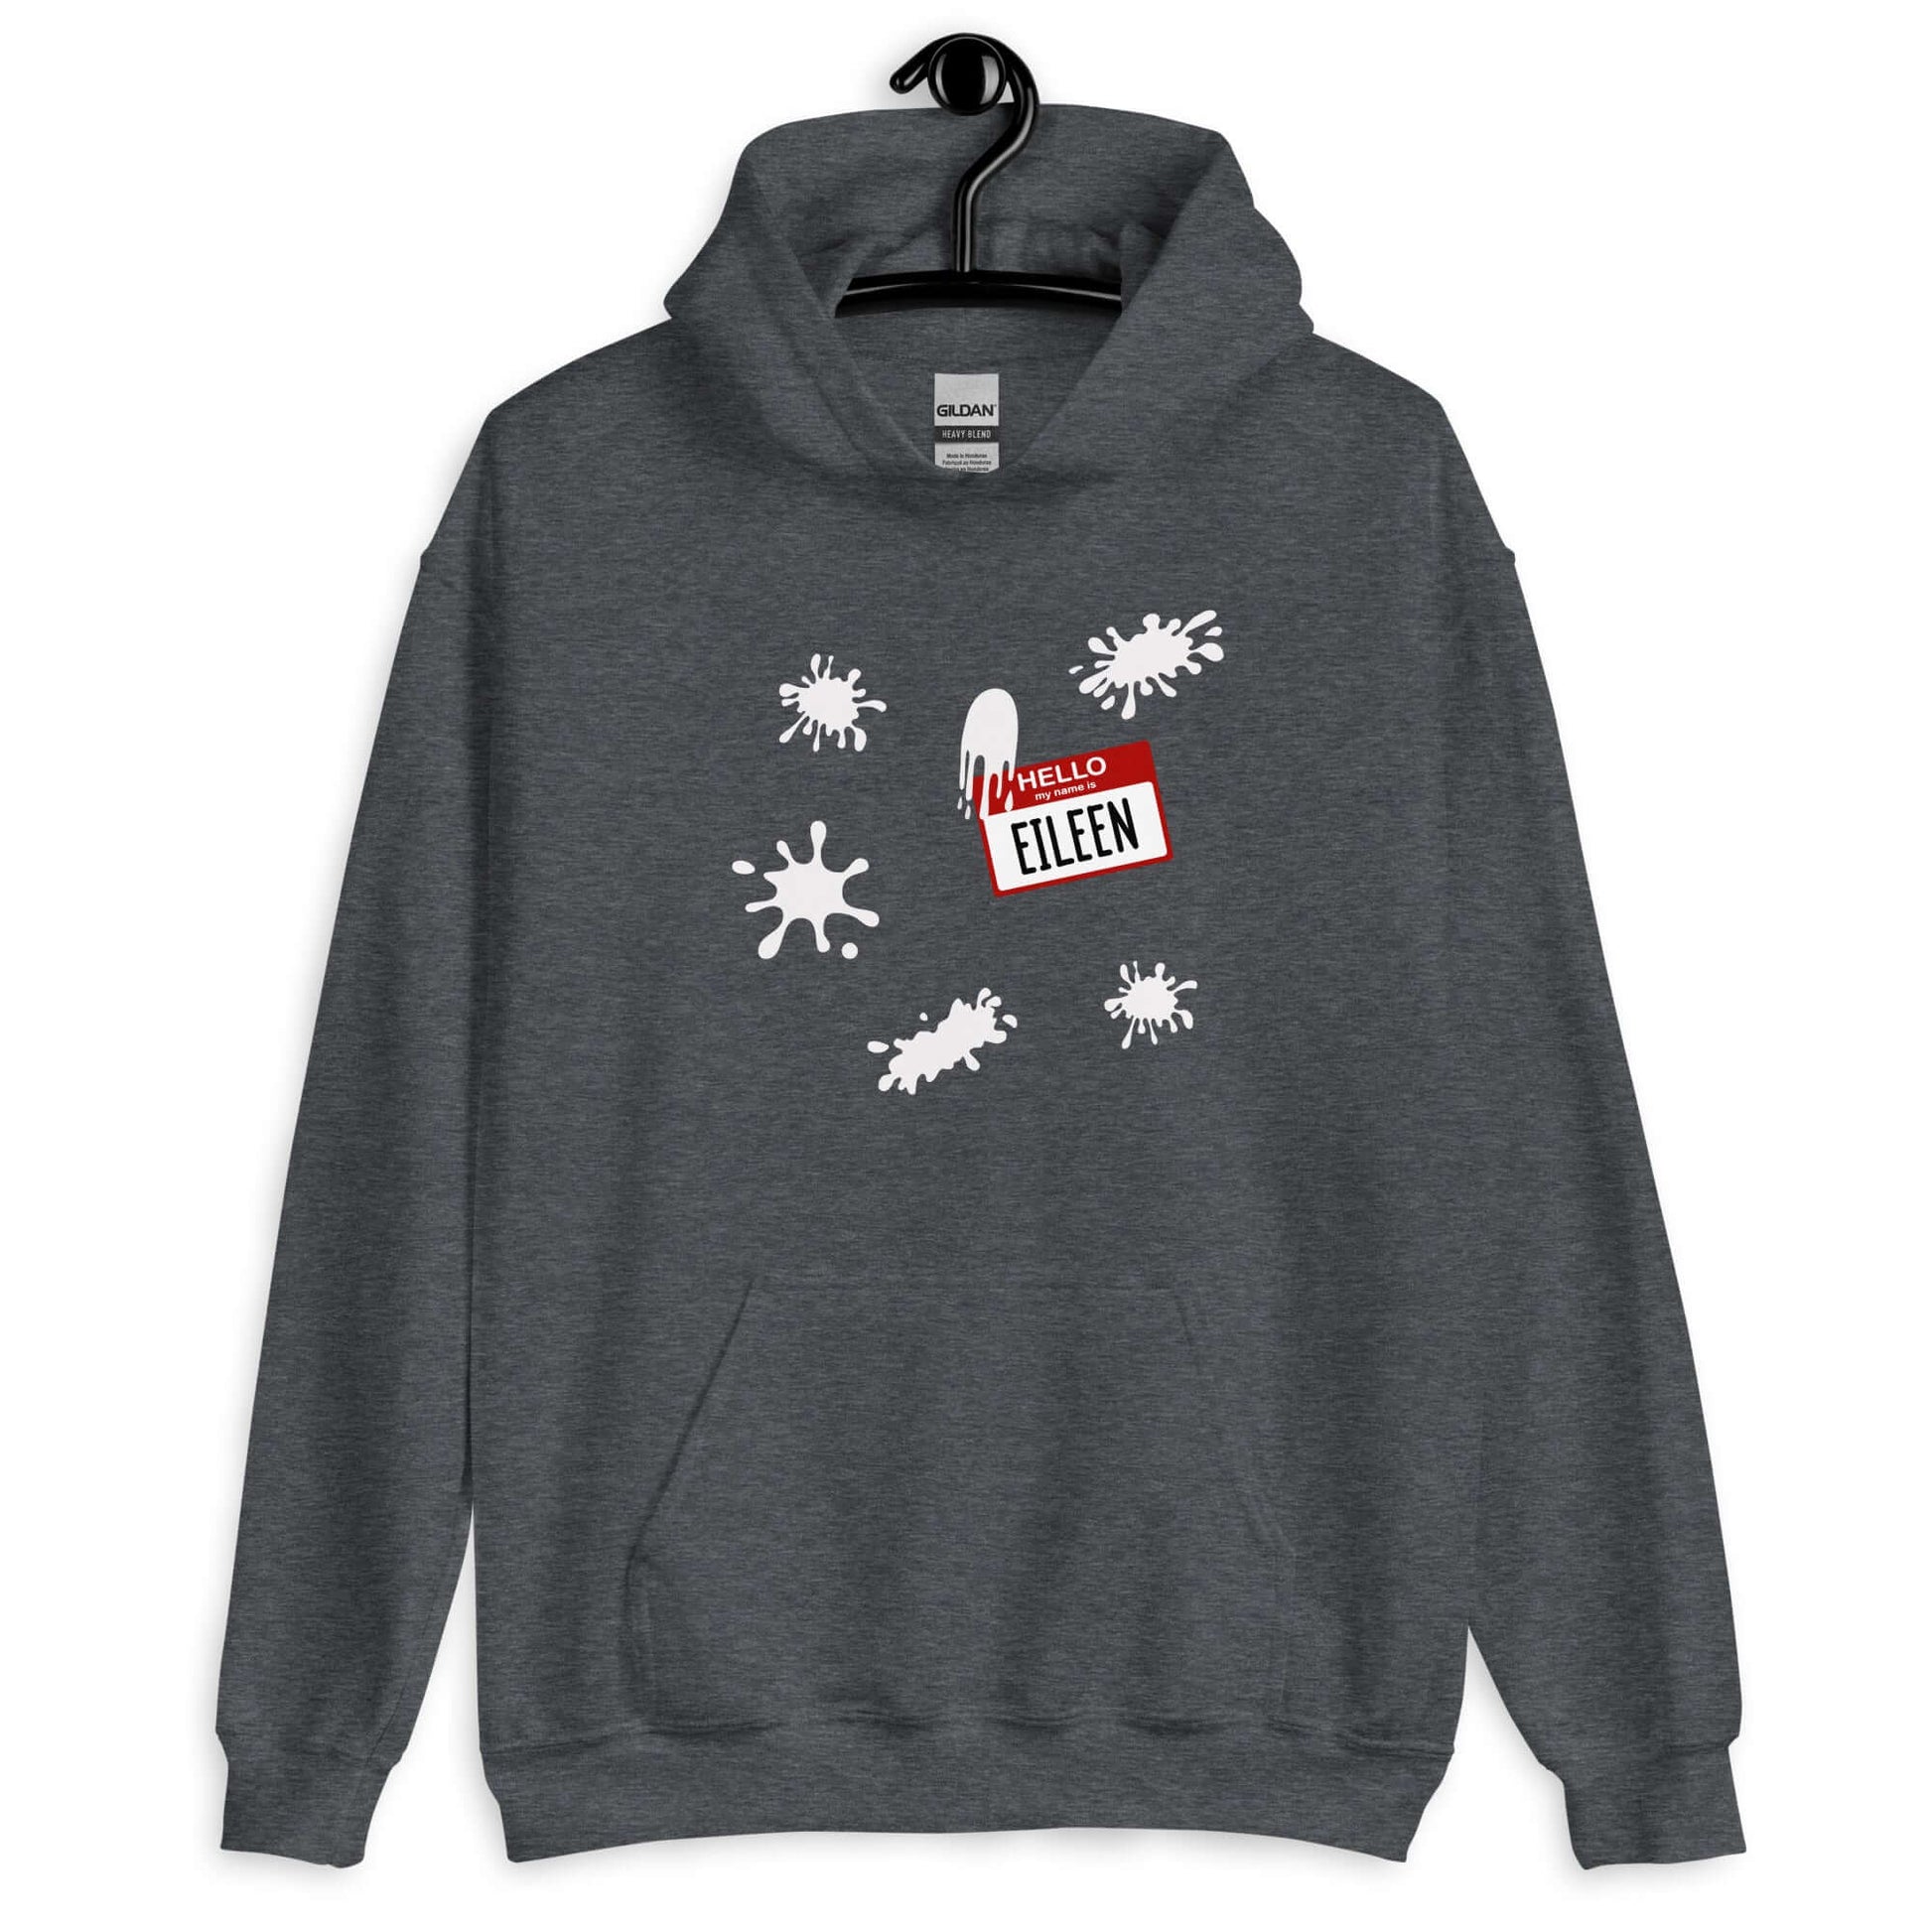 Dark heather grey hoodie sweatshirt with Eileen name tag and white splatters printed on the front.